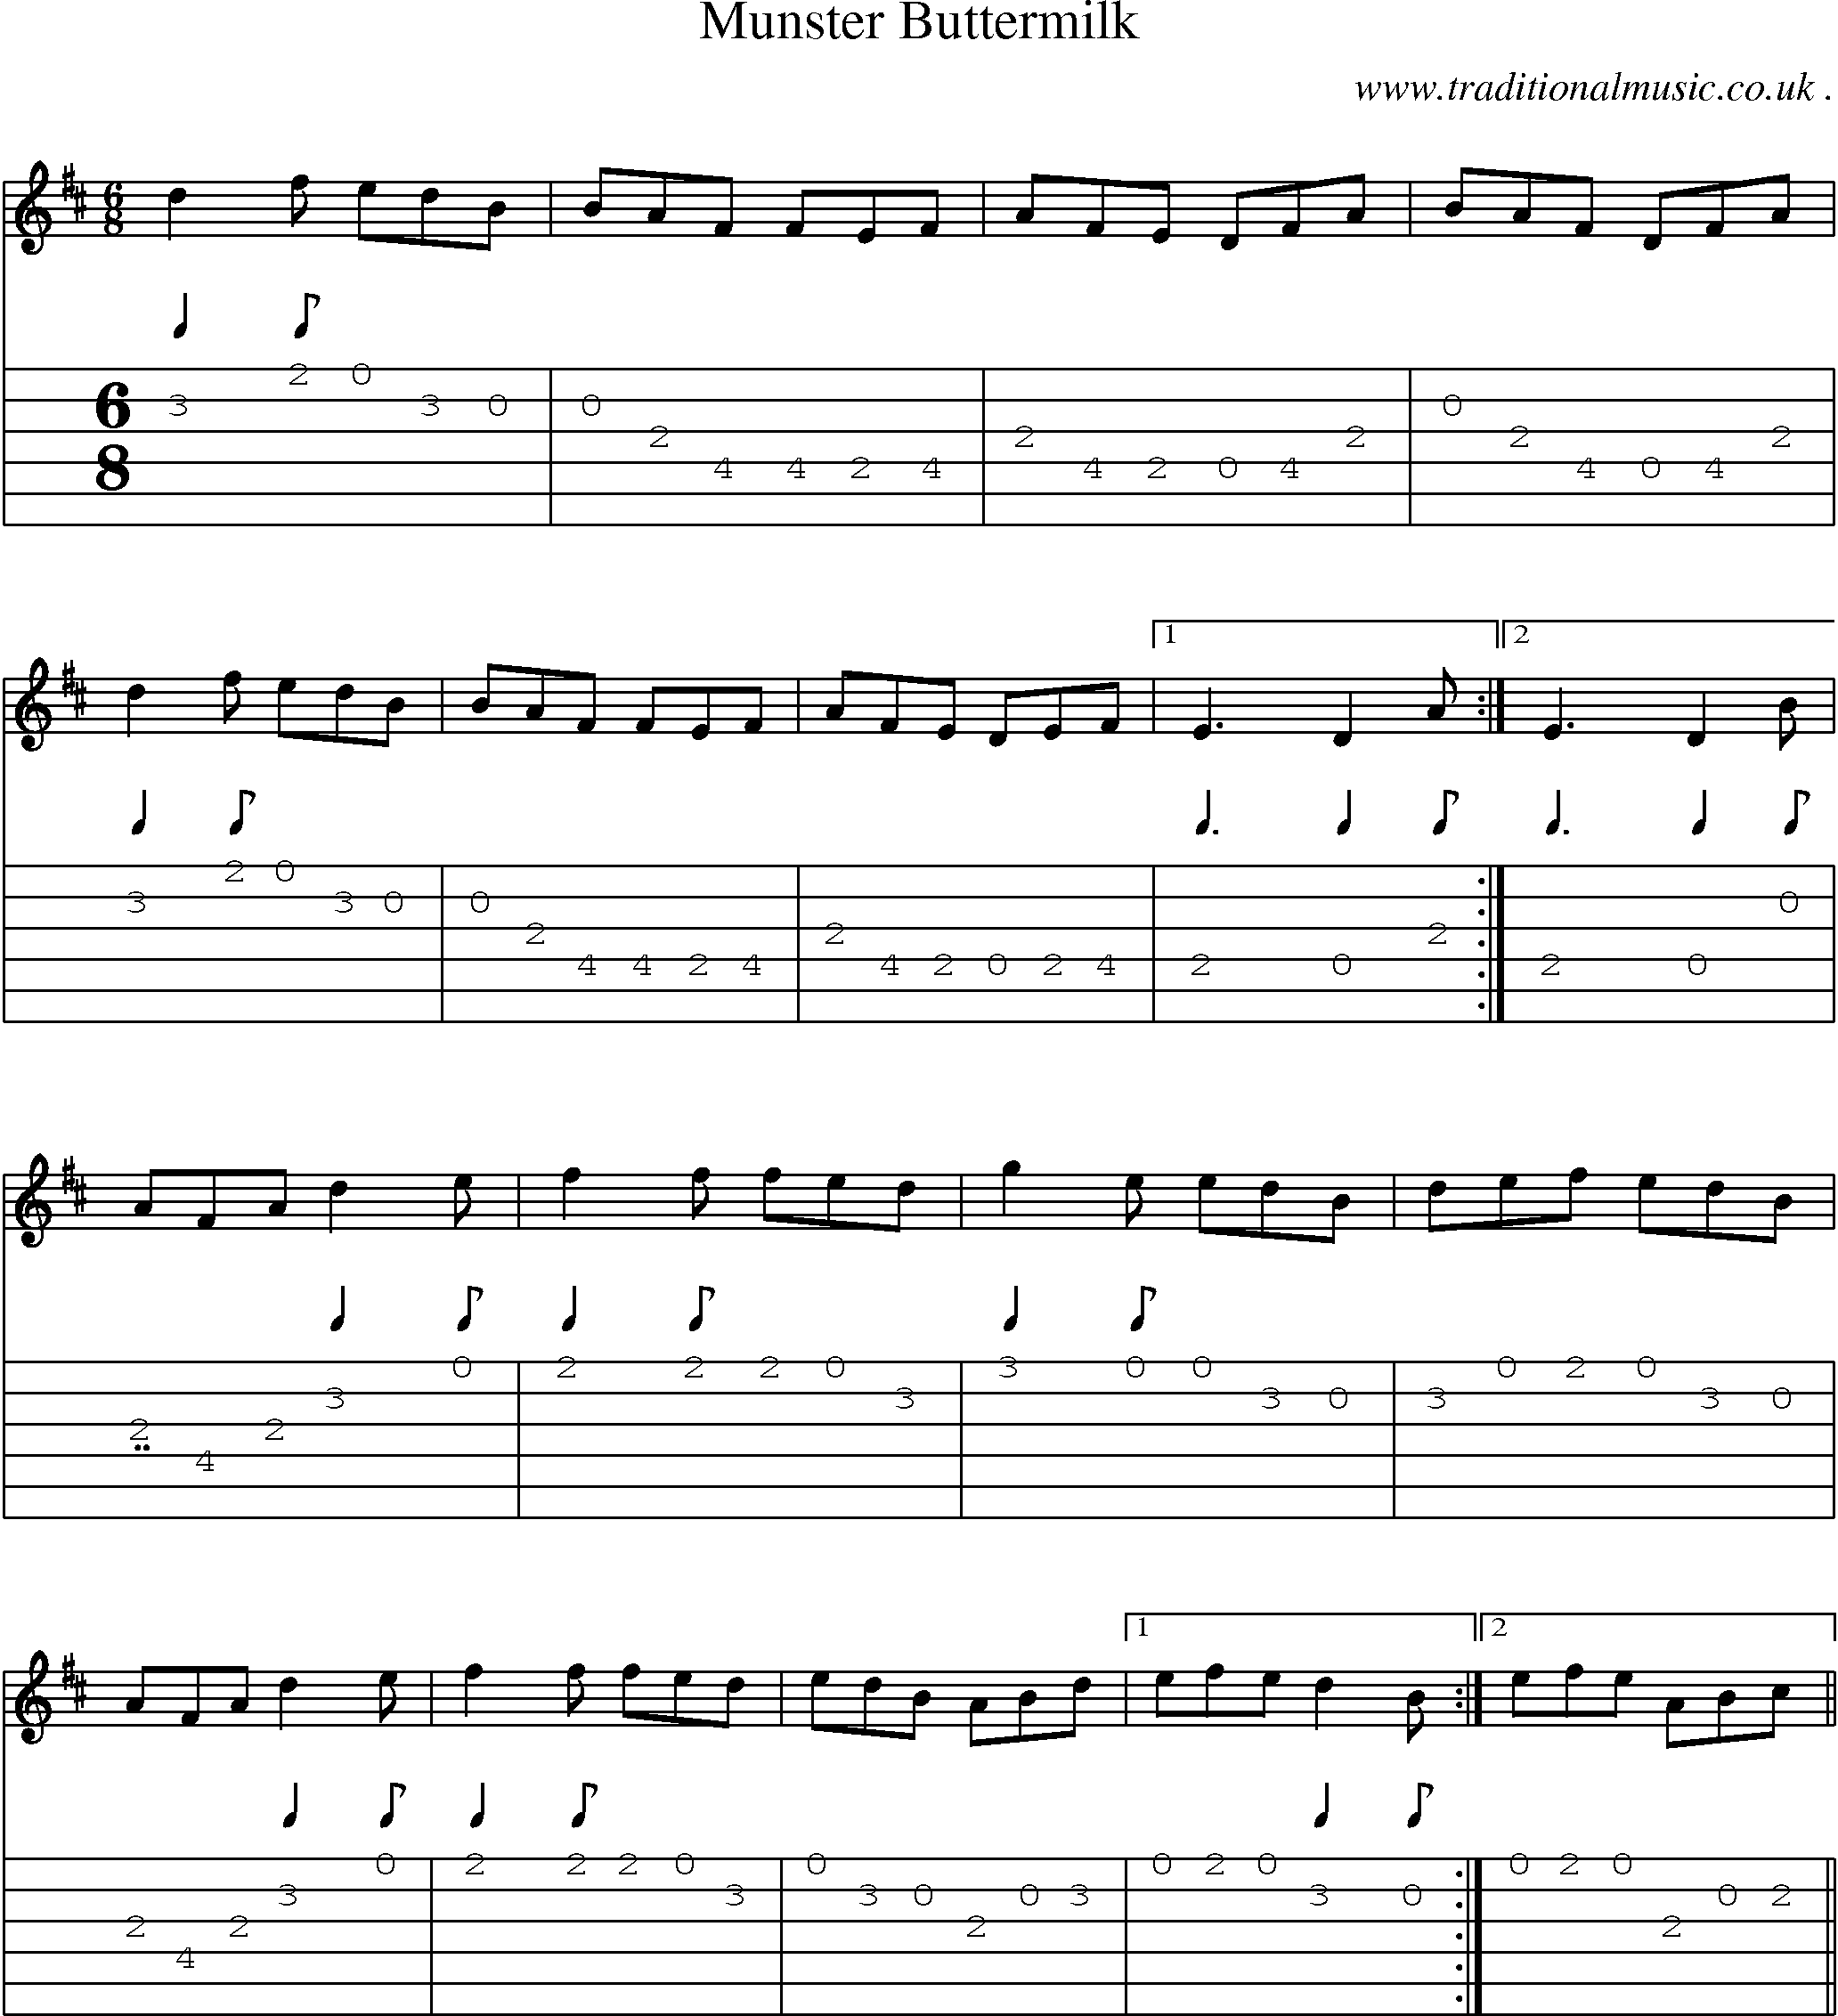 Sheet-Music and Guitar Tabs for Munster Buttermilk